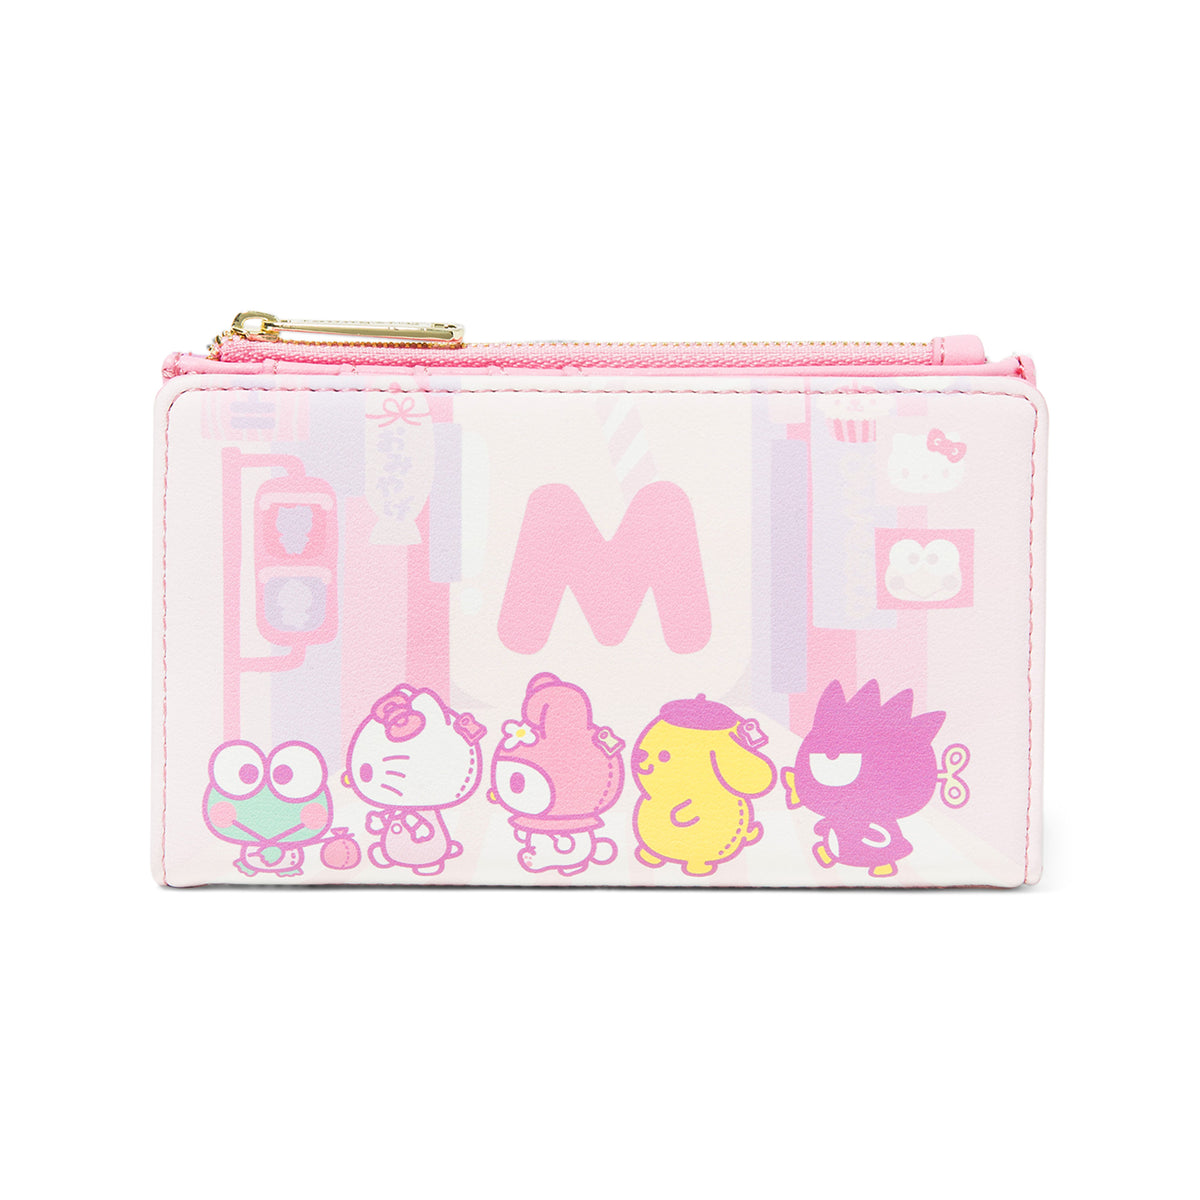 Quilted Pen Pouch My Melody (Sanrio forever)